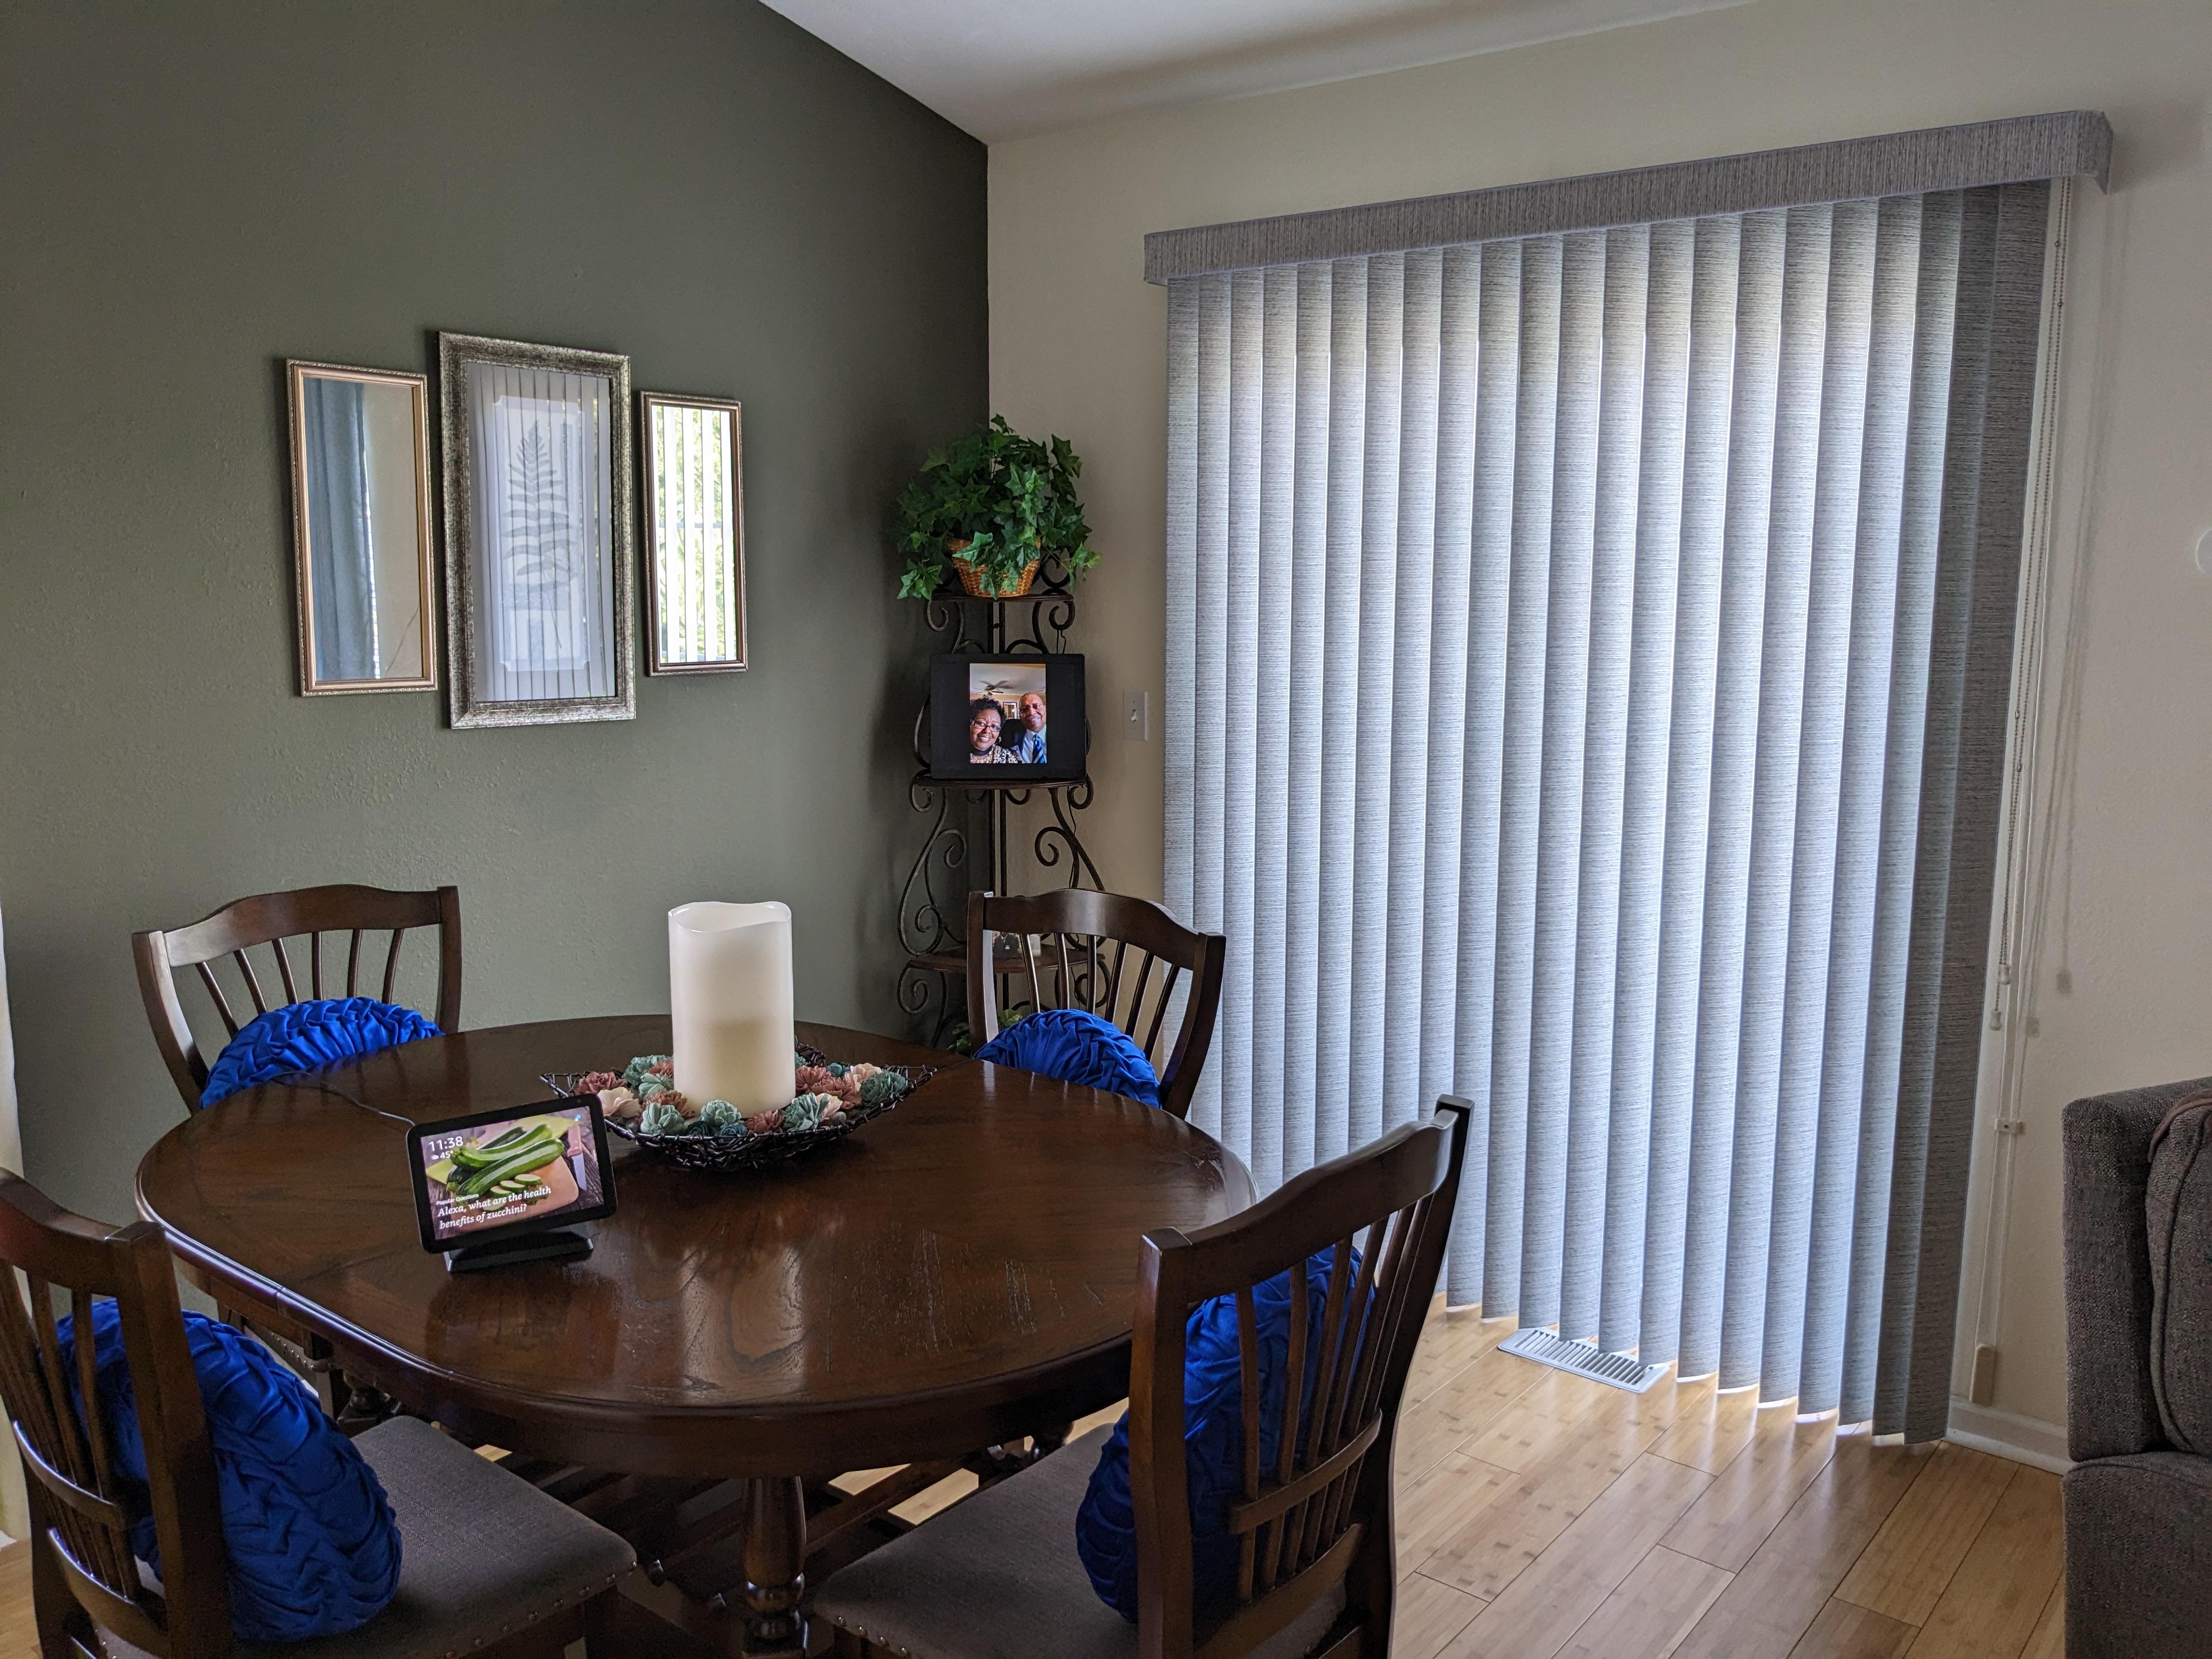 Vertical blinds in Springfield Illinois dining room covering sliding door.  BudgetBlinds  WindowCoverings  Blinds  VerticalBlinds